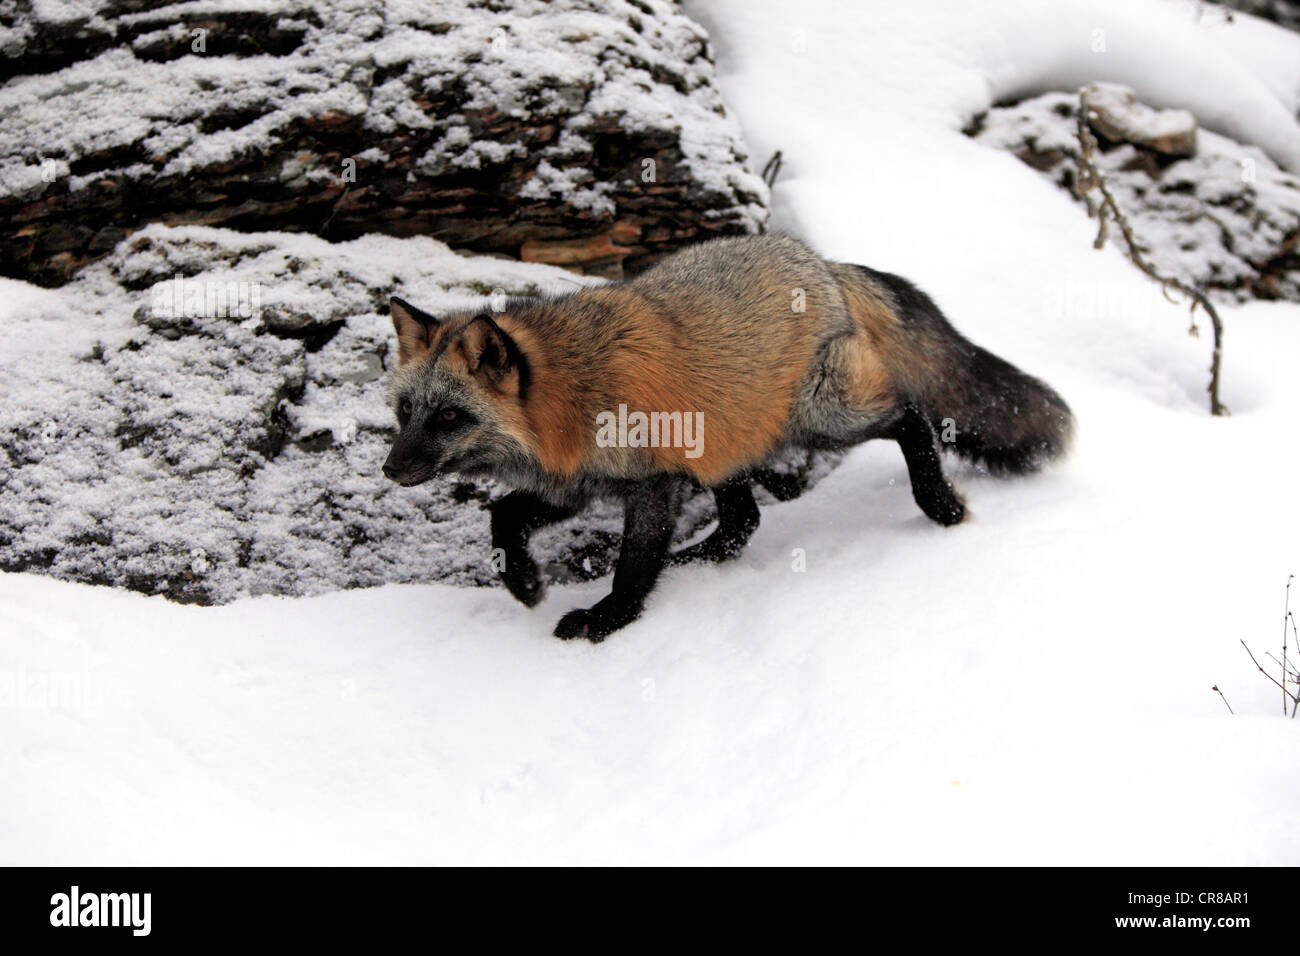 North American Red Fox (Vulpes vulpes), adult, foraging in the snow, winter, Montana, USA Stock Photo